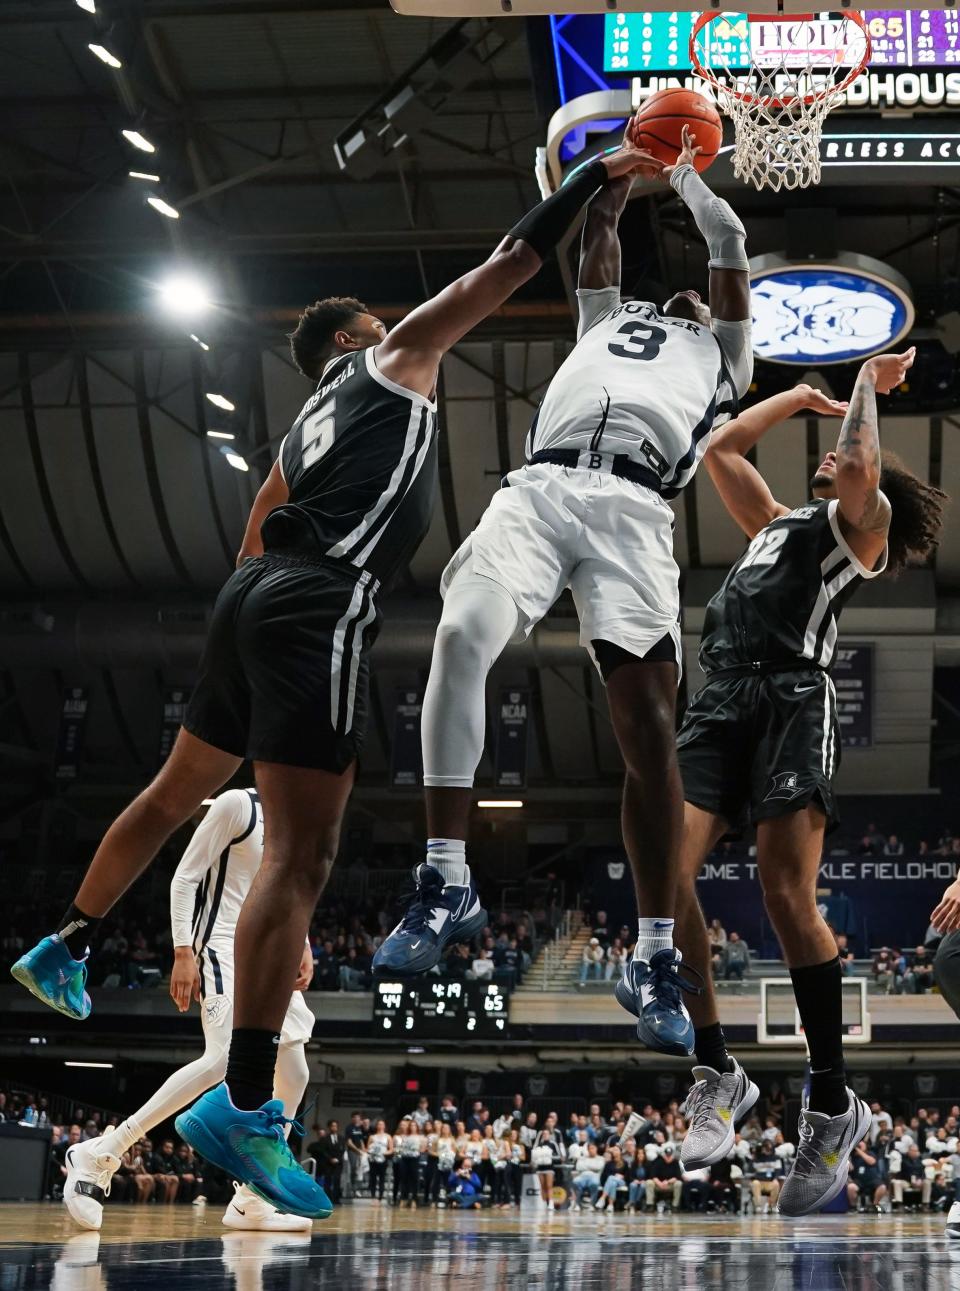 Friars forward Ed Croswell blocks a shot attempt by Butler Bulldogs forward Chuck Harris during the second half on Thursday night in Indianapolis.